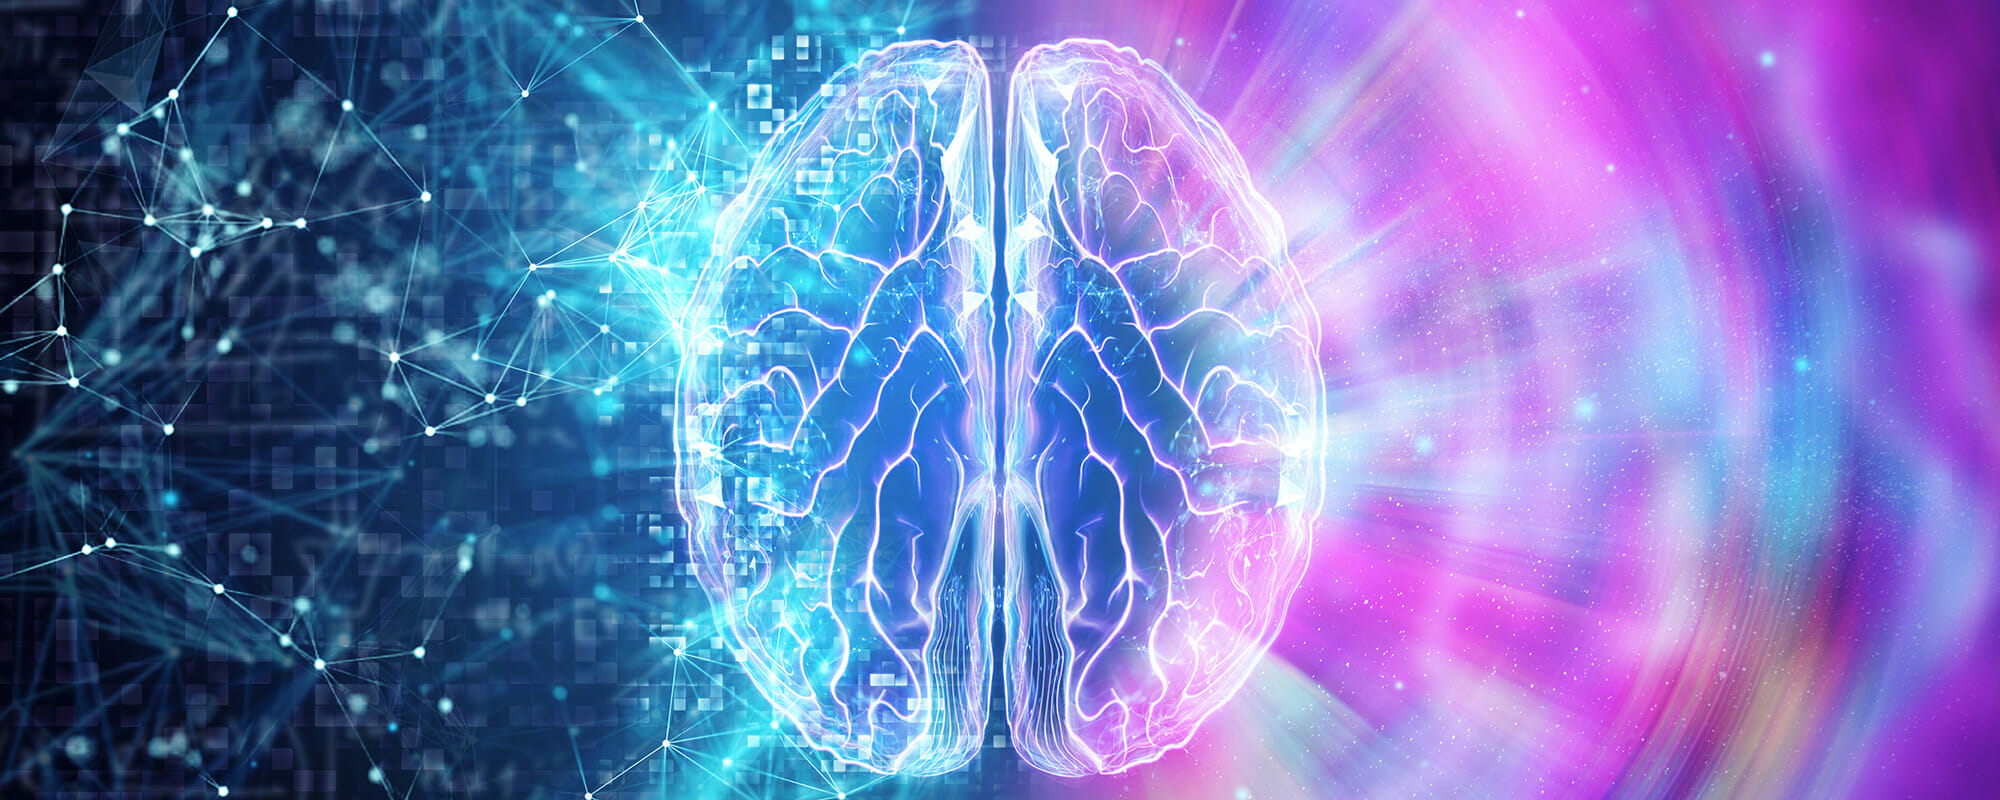 Vector image of brain showing data being processed